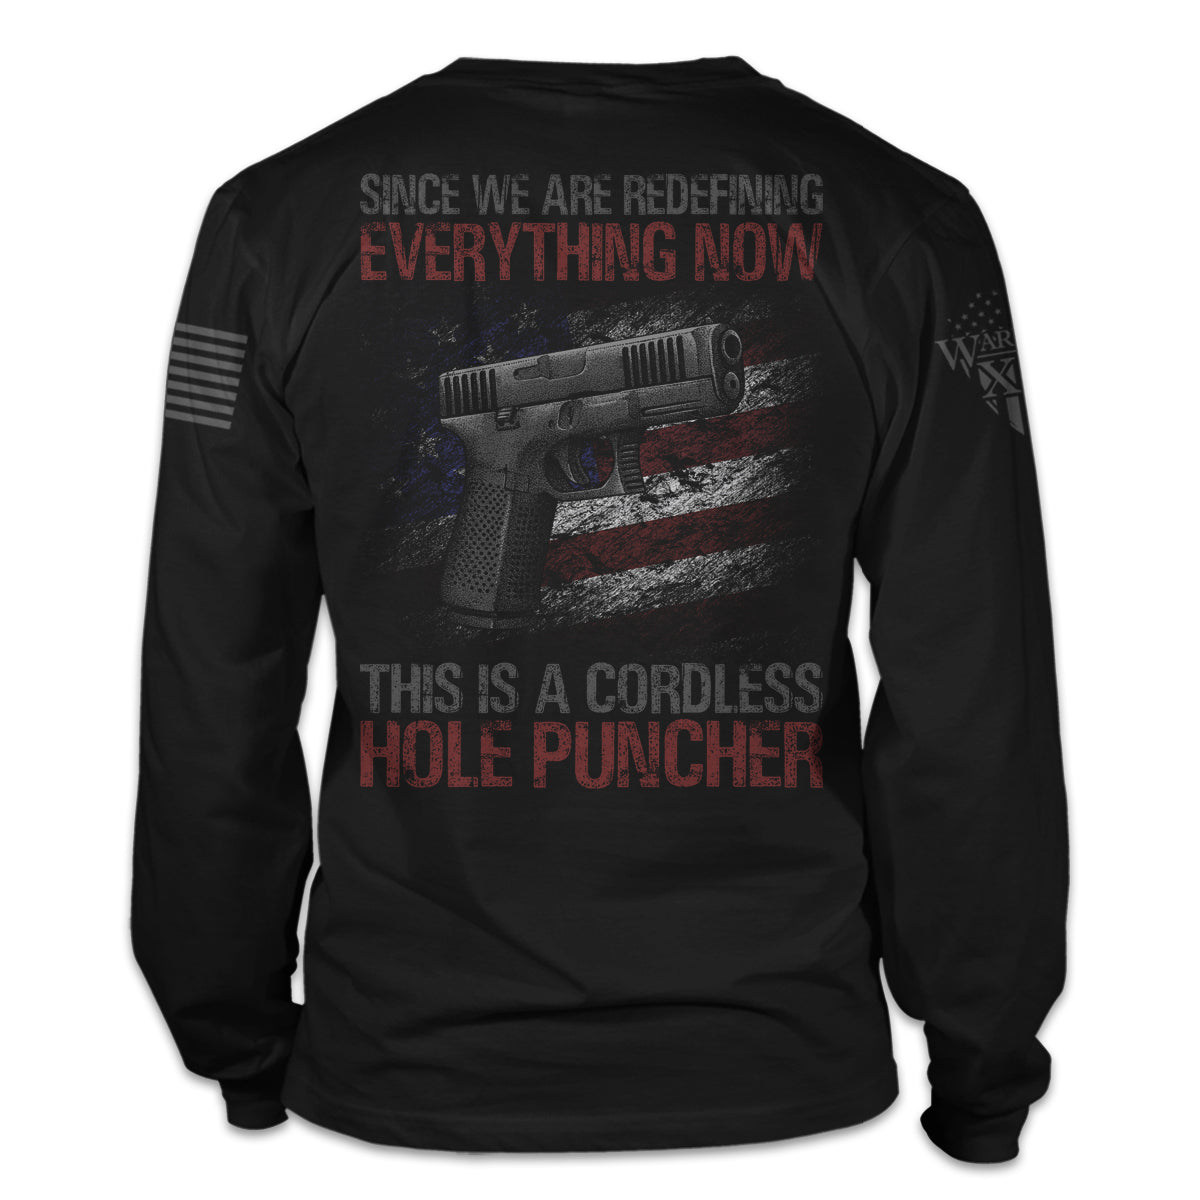 A black long sleeve shirt with the words "Since we are redefining everything now, this is a cordless hole puncher", with a pistol printed on the back of the shirt.